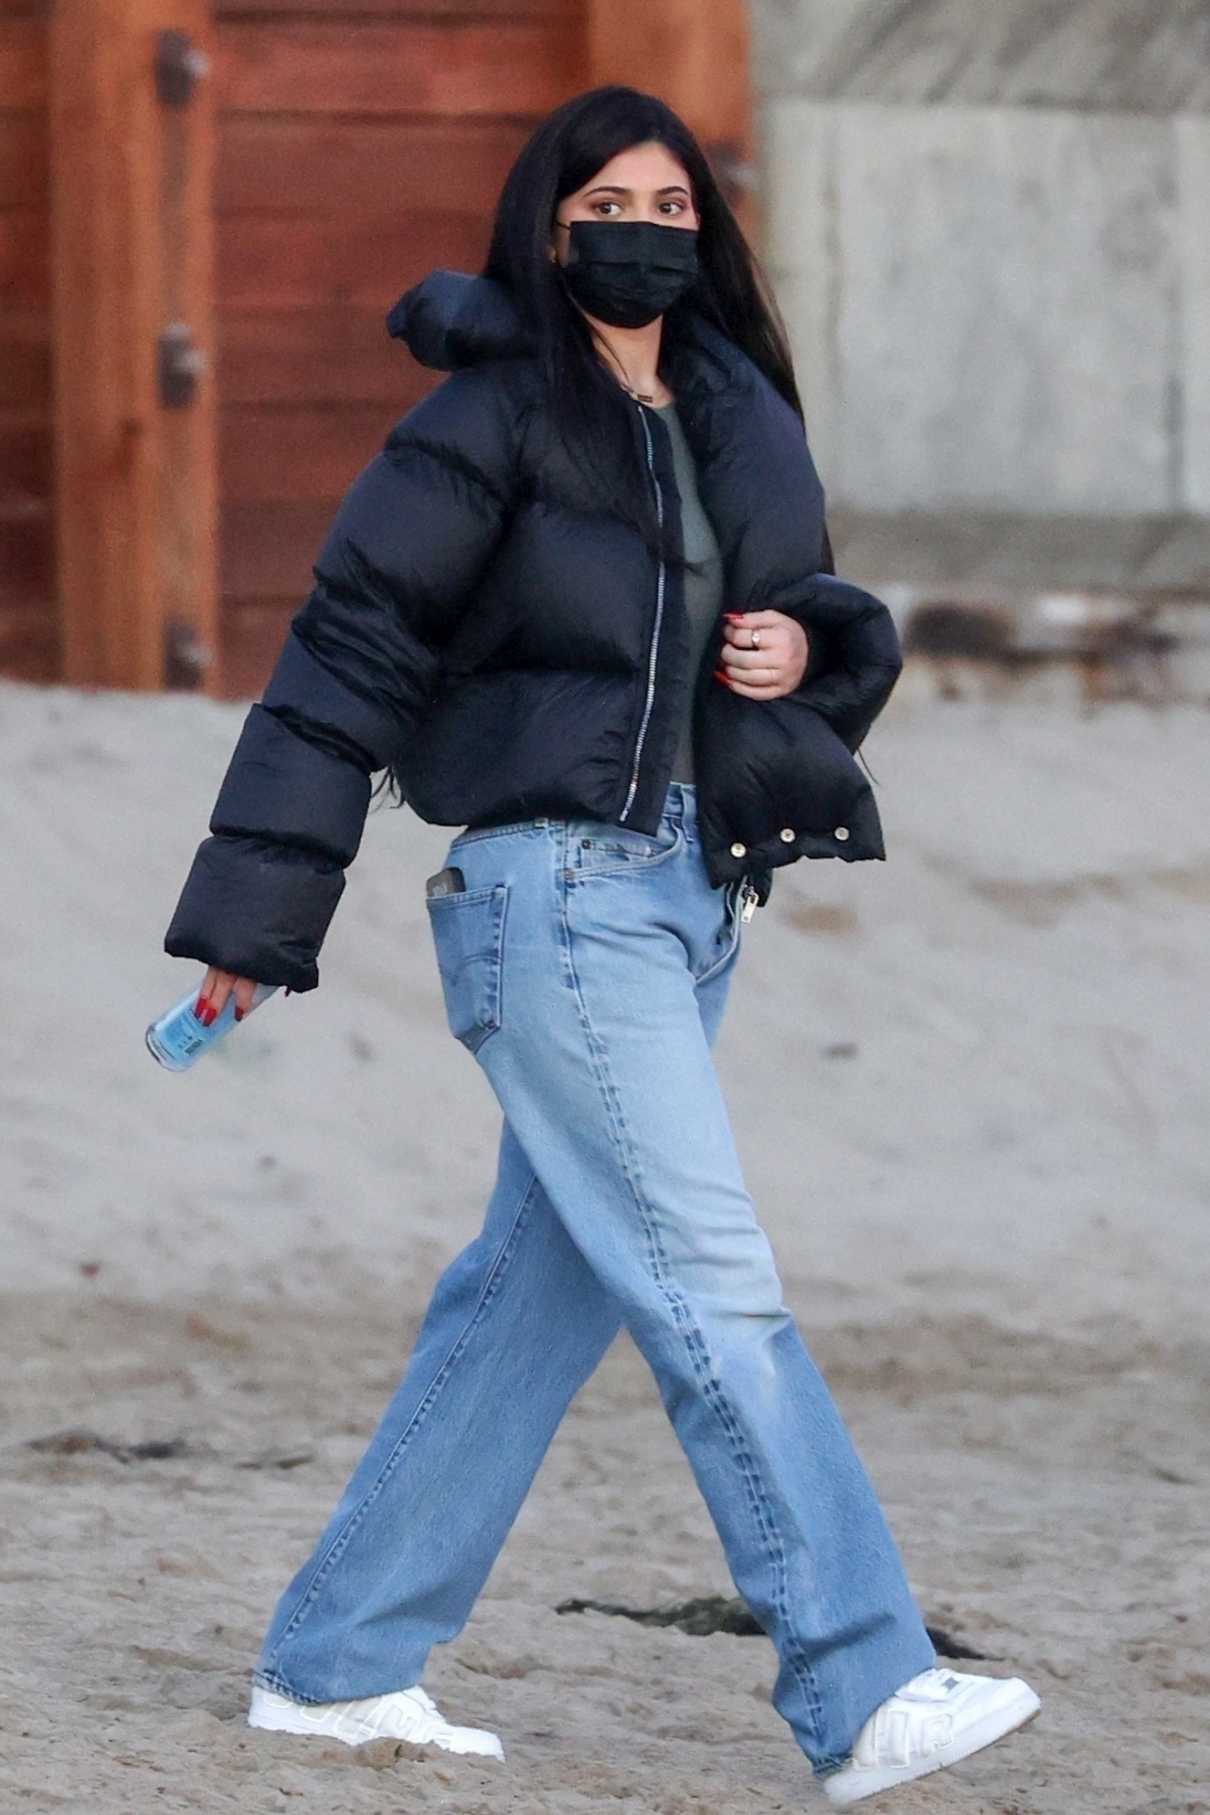 Kylie Jenner in a Black Puffer Jacket Was Seen Out in Santa Barbara 02 ...